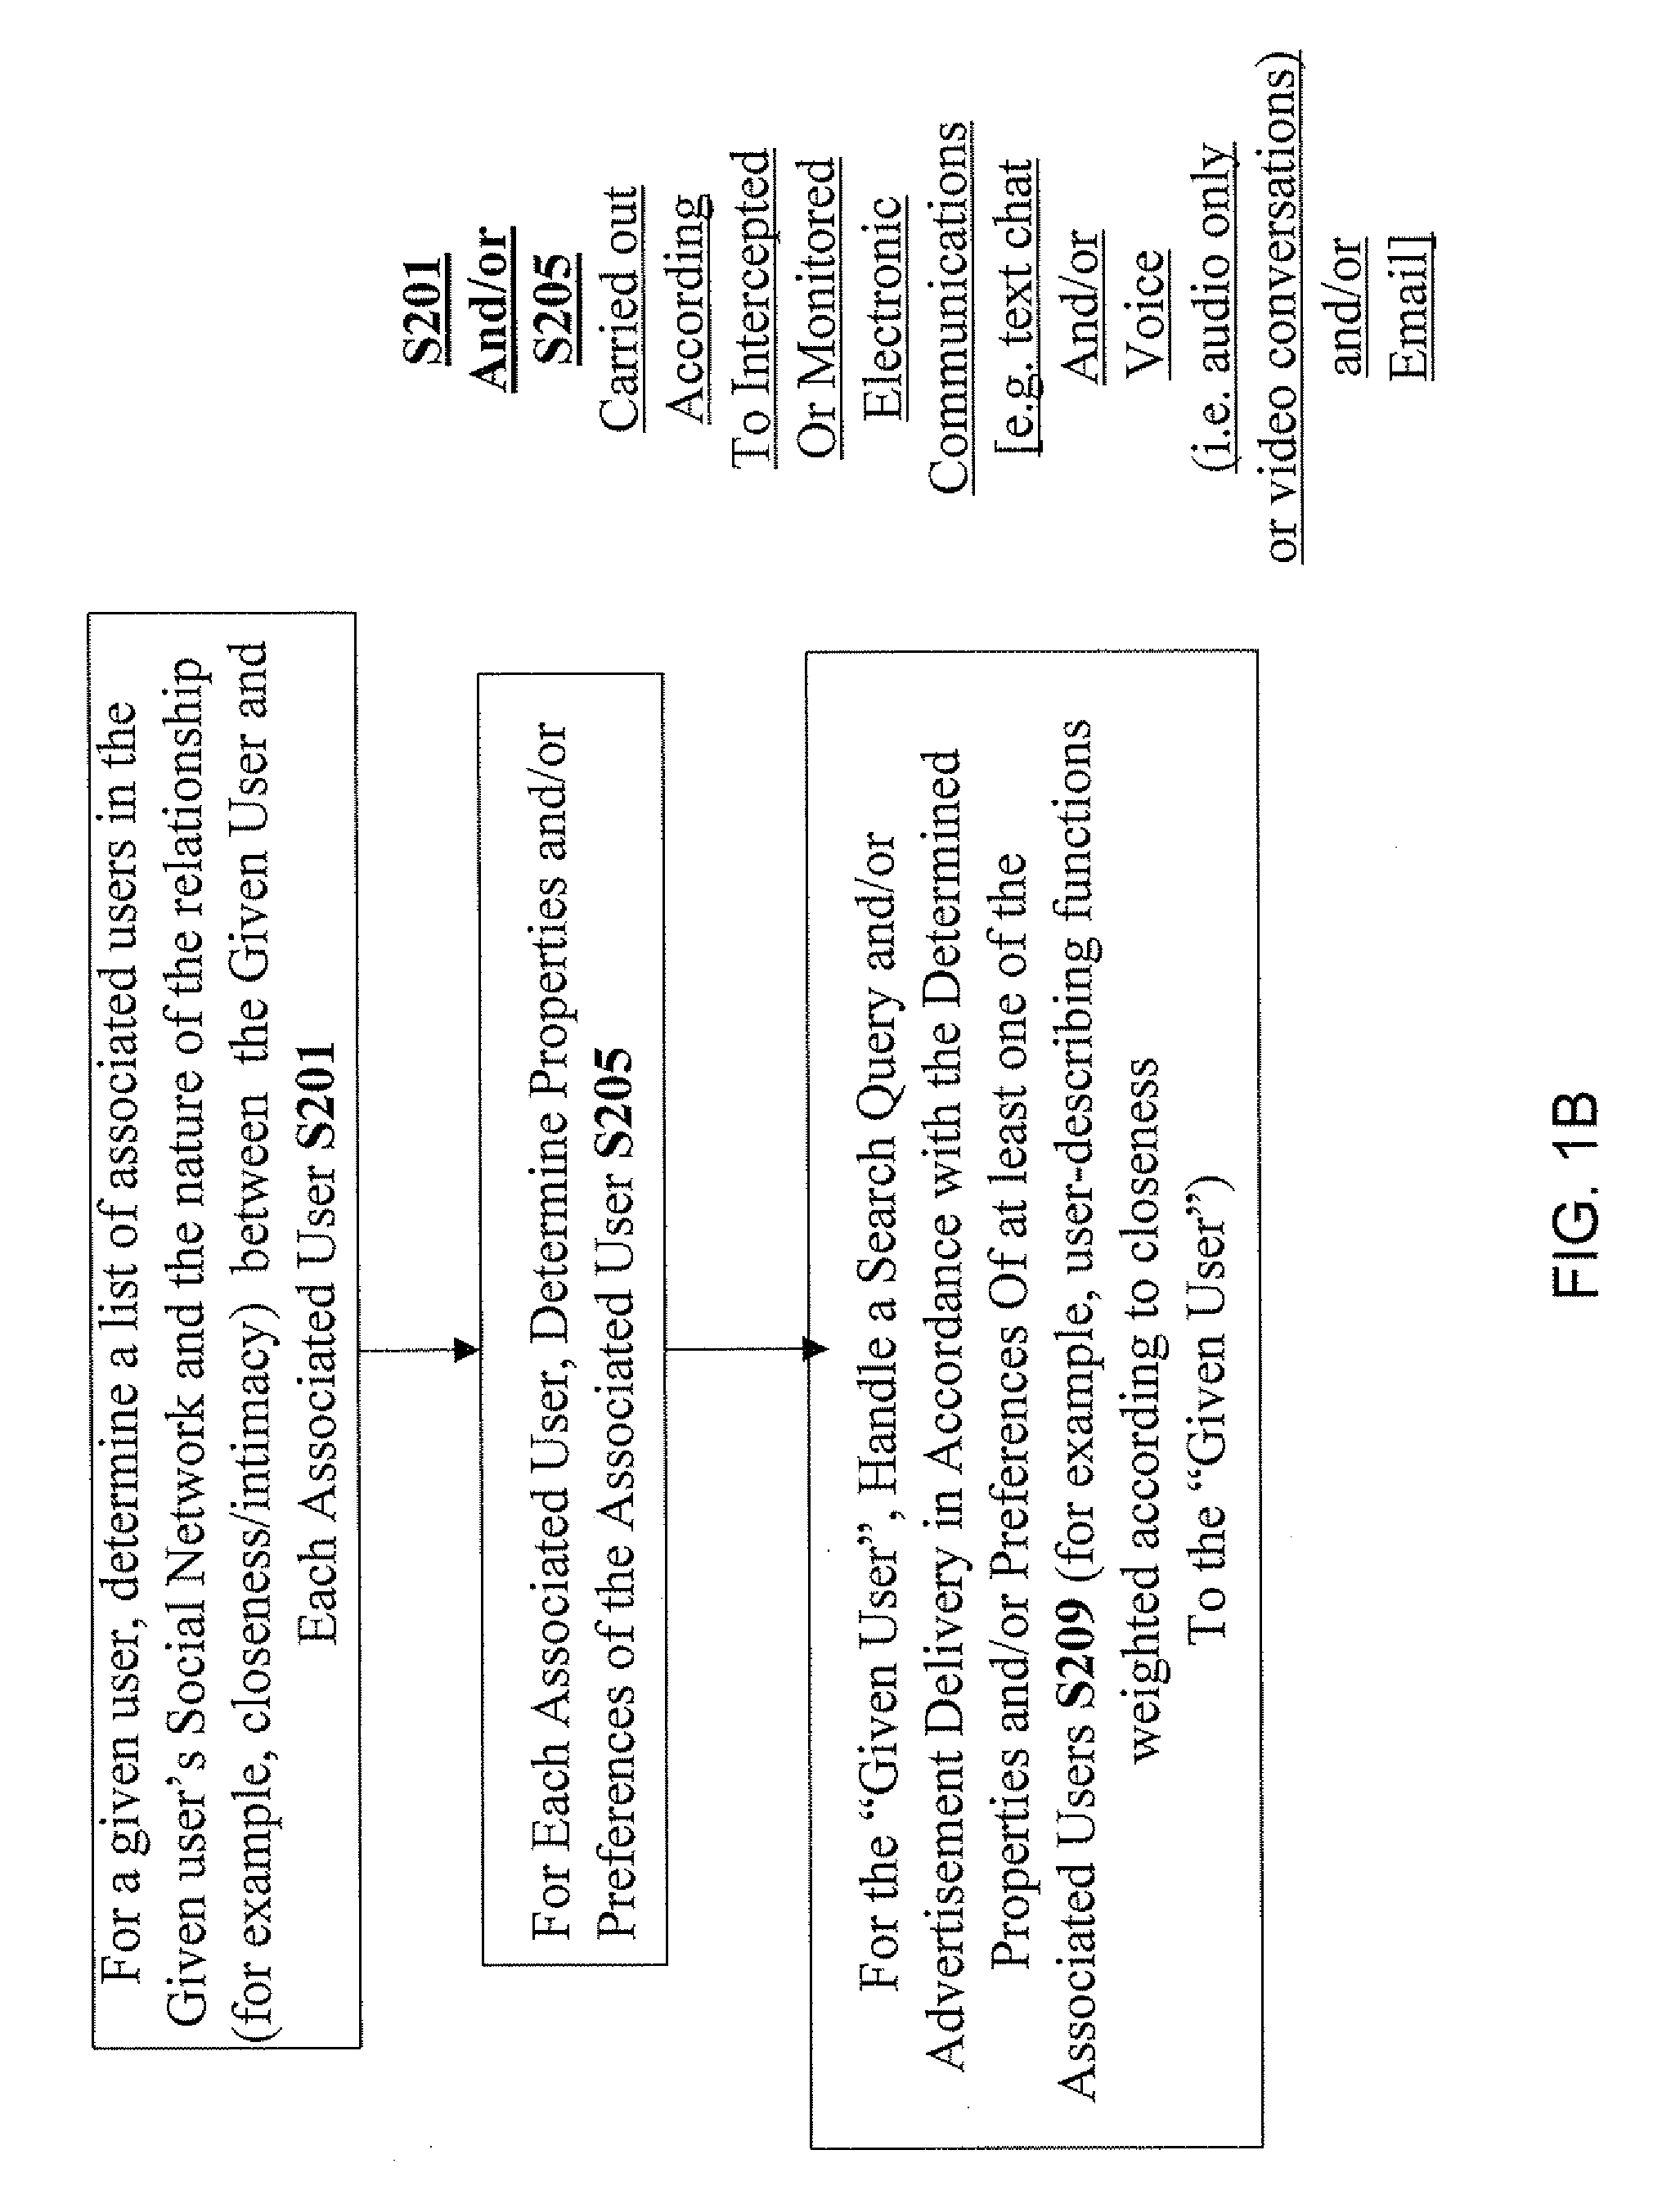 Apparatus and computer code for providing social-network dependent information retrieval services